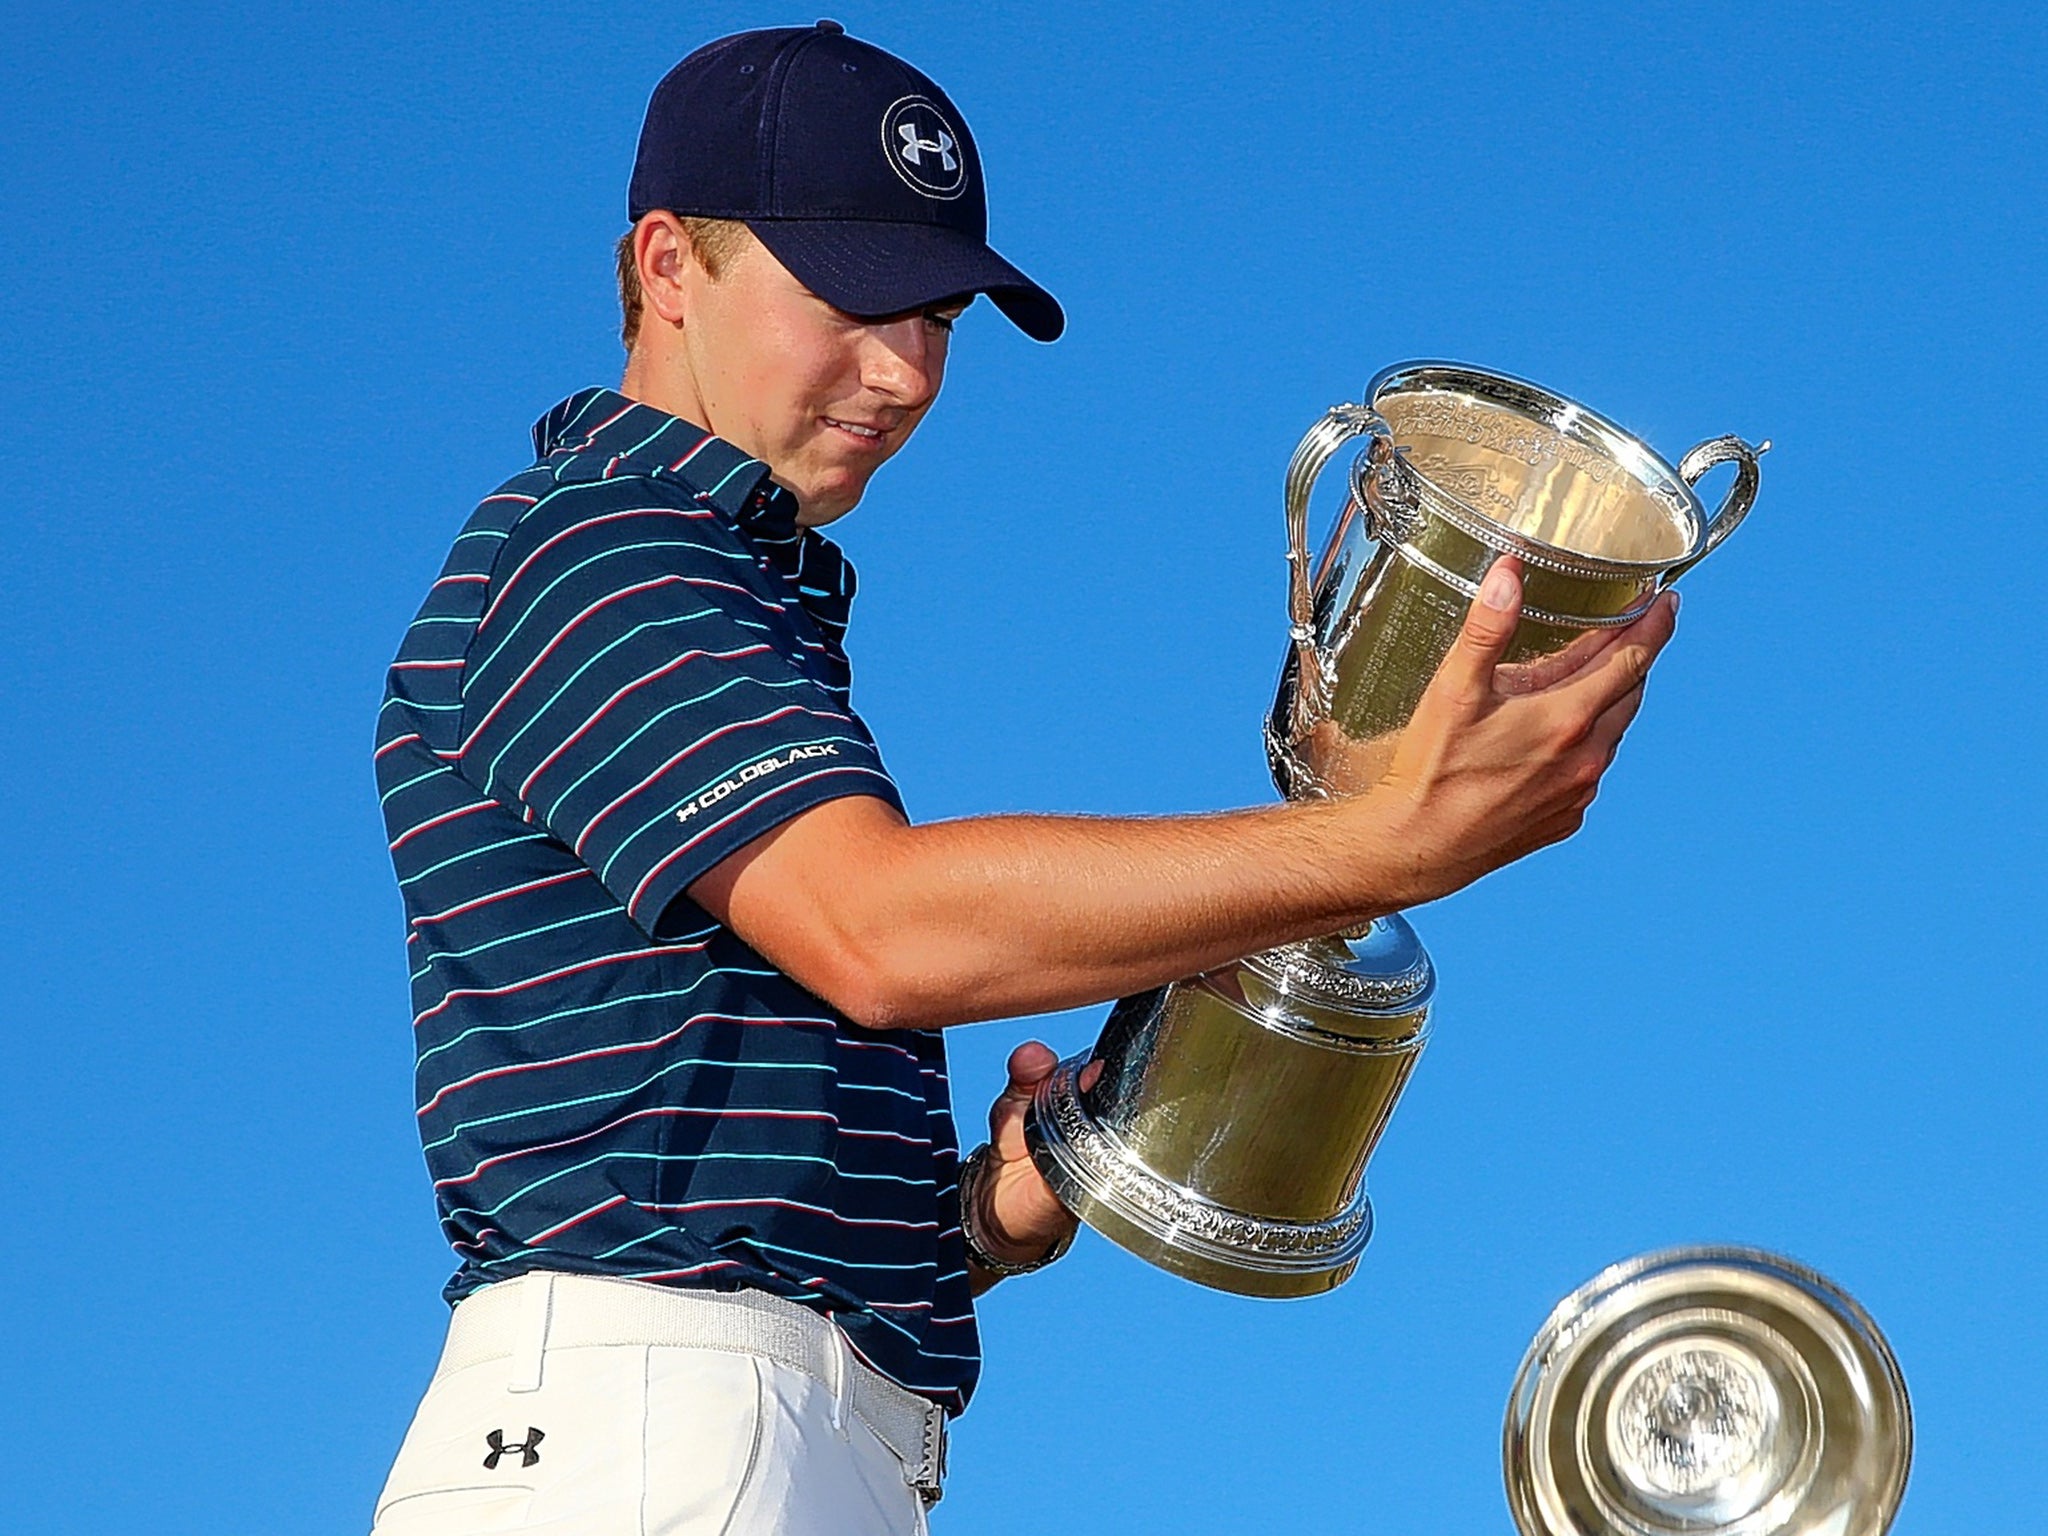 Spieth with the US Open trophy